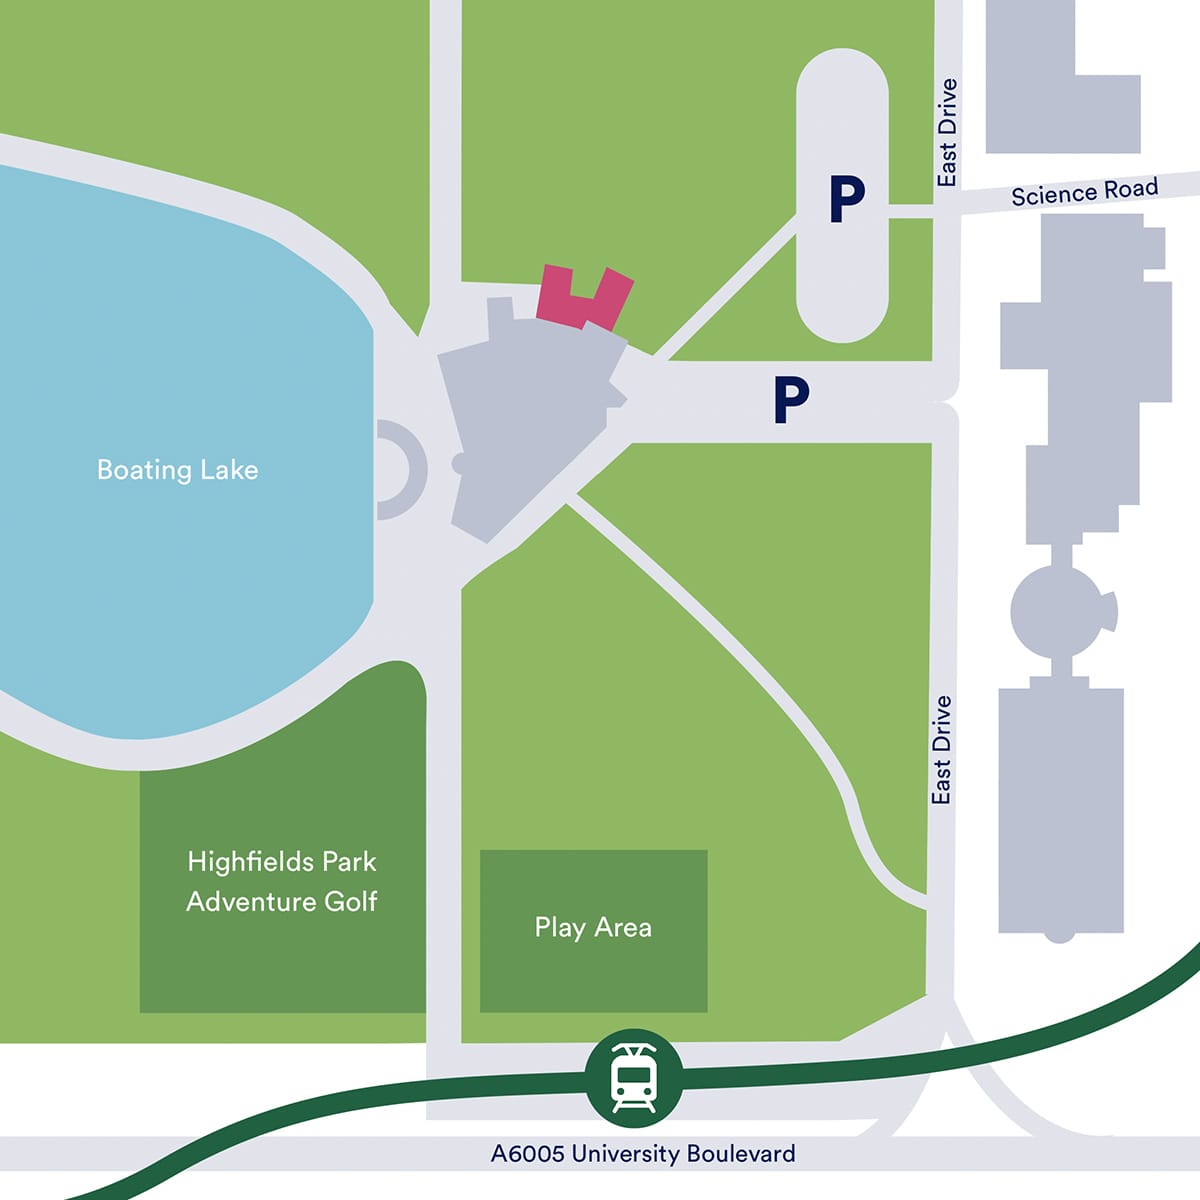 A map showing where the Visual Arts Studio is located in relation to Lakeside Arts' buildings and the surrounding parkland.